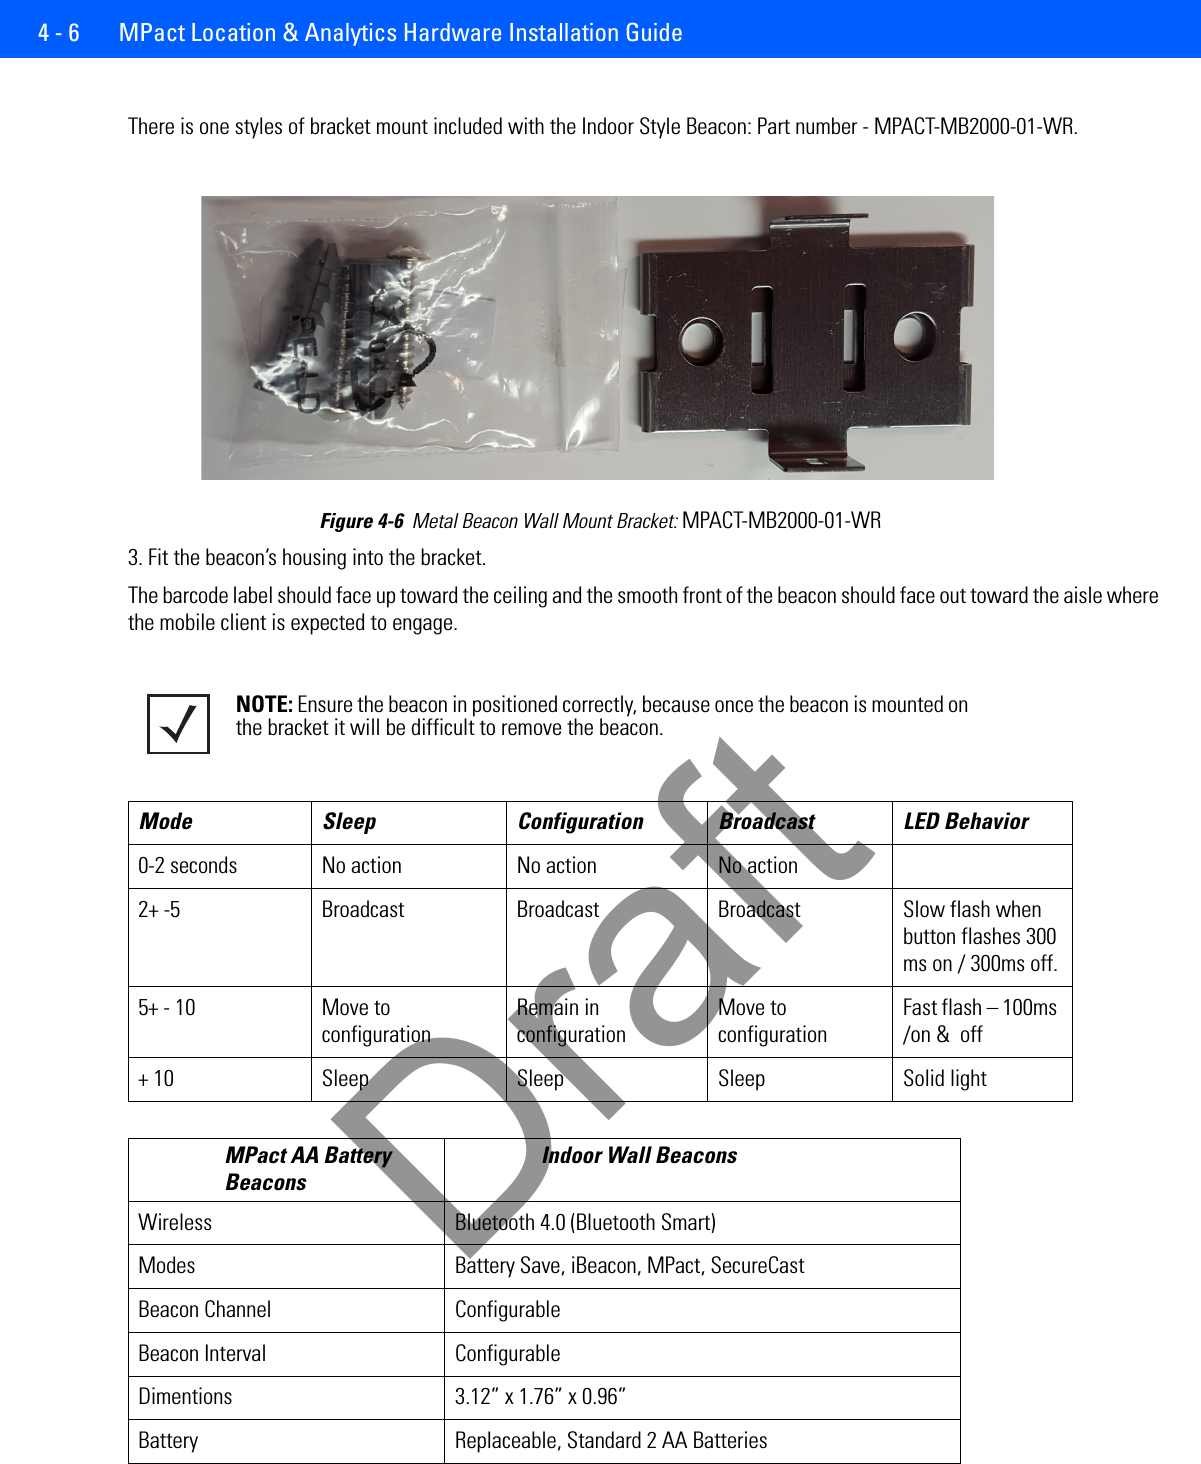 4 - 6  MPact Location &amp; Analytics Hardware Installation GuideThere is one styles of bracket mount included with the Indoor Style Beacon: Part number - MPACT-MB2000-01-WR.Figure 4-6  Metal Beacon Wall Mount Bracket: MPACT-MB2000-01-WR3. Fit the beacon’s housing into the bracket.The barcode label should face up toward the ceiling and the smooth front of the beacon should face out toward the aisle where the mobile client is expected to engage. NOTE: Ensure the beacon in positioned correctly, because once the beacon is mounted on the bracket it will be difficult to remove the beacon. Mode Sleep Configuration Broadcast LED Behavior0-2 seconds No action No action No action2+ -5 Broadcast Broadcast Broadcast Slow flash when button flashes 300 ms on / 300ms off.5+ - 10 Move to configurationRemain in configurationMove to configurationFast flash – 100ms /on &amp;  off+ 10 Sleep Sleep Sleep Solid lightMPact AA Battery BeaconsIndoor Wall BeaconsWireless Bluetooth 4.0 (Bluetooth Smart)Modes Battery Save, iBeacon, MPact, SecureCastBeacon Channel ConfigurableBeacon Interval ConfigurableDimentions 3.12” x 1.76” x 0.96”Battery Replaceable, Standard 2 AA BatteriesDraft